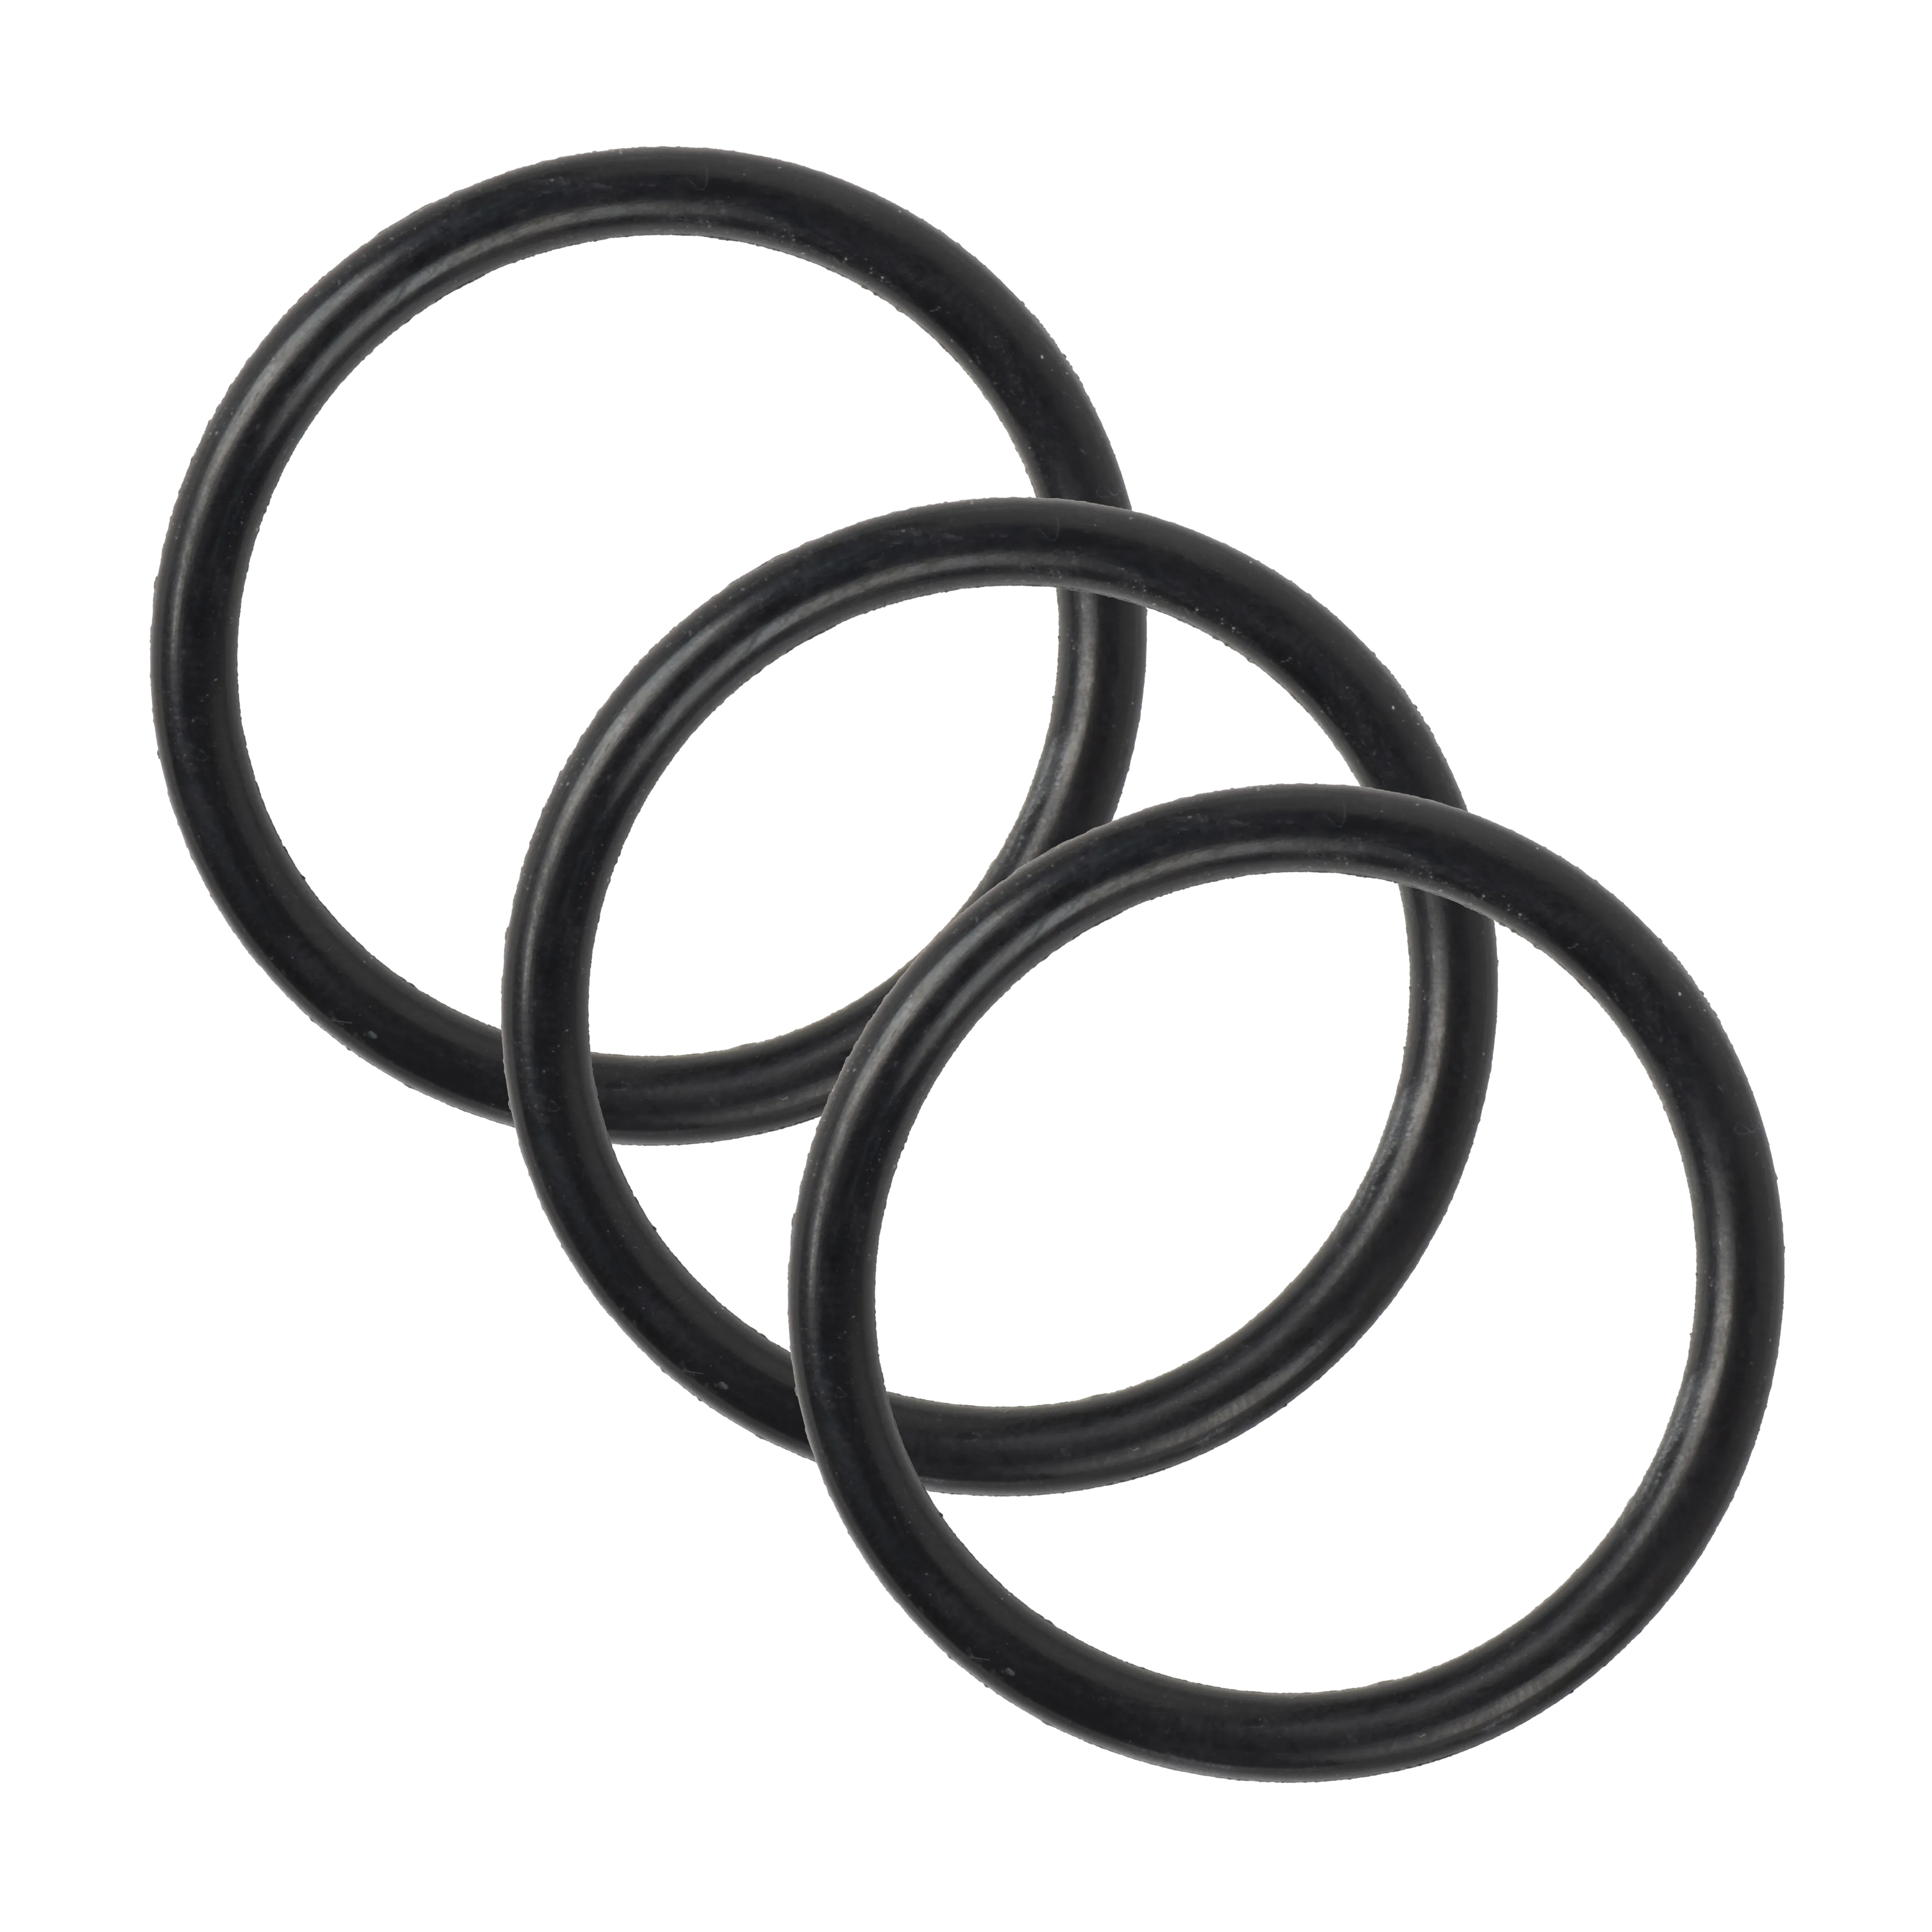 Spare O-Rings for CRB Roller Stand, 3-Pack